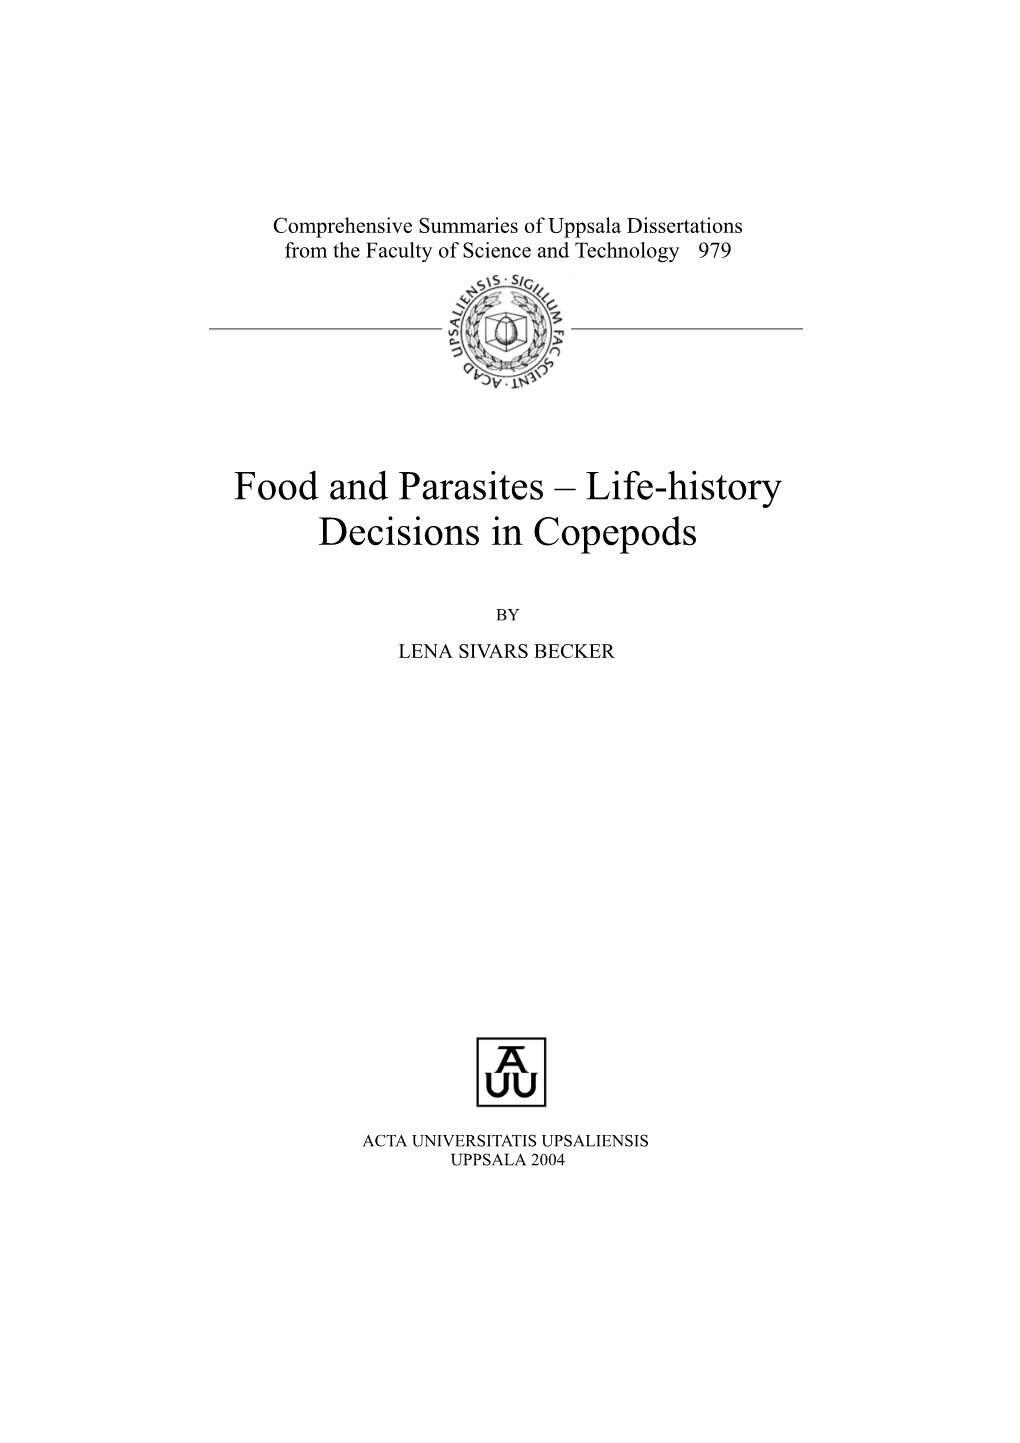 Food and Parasites – Life-History Decisions in Copepods